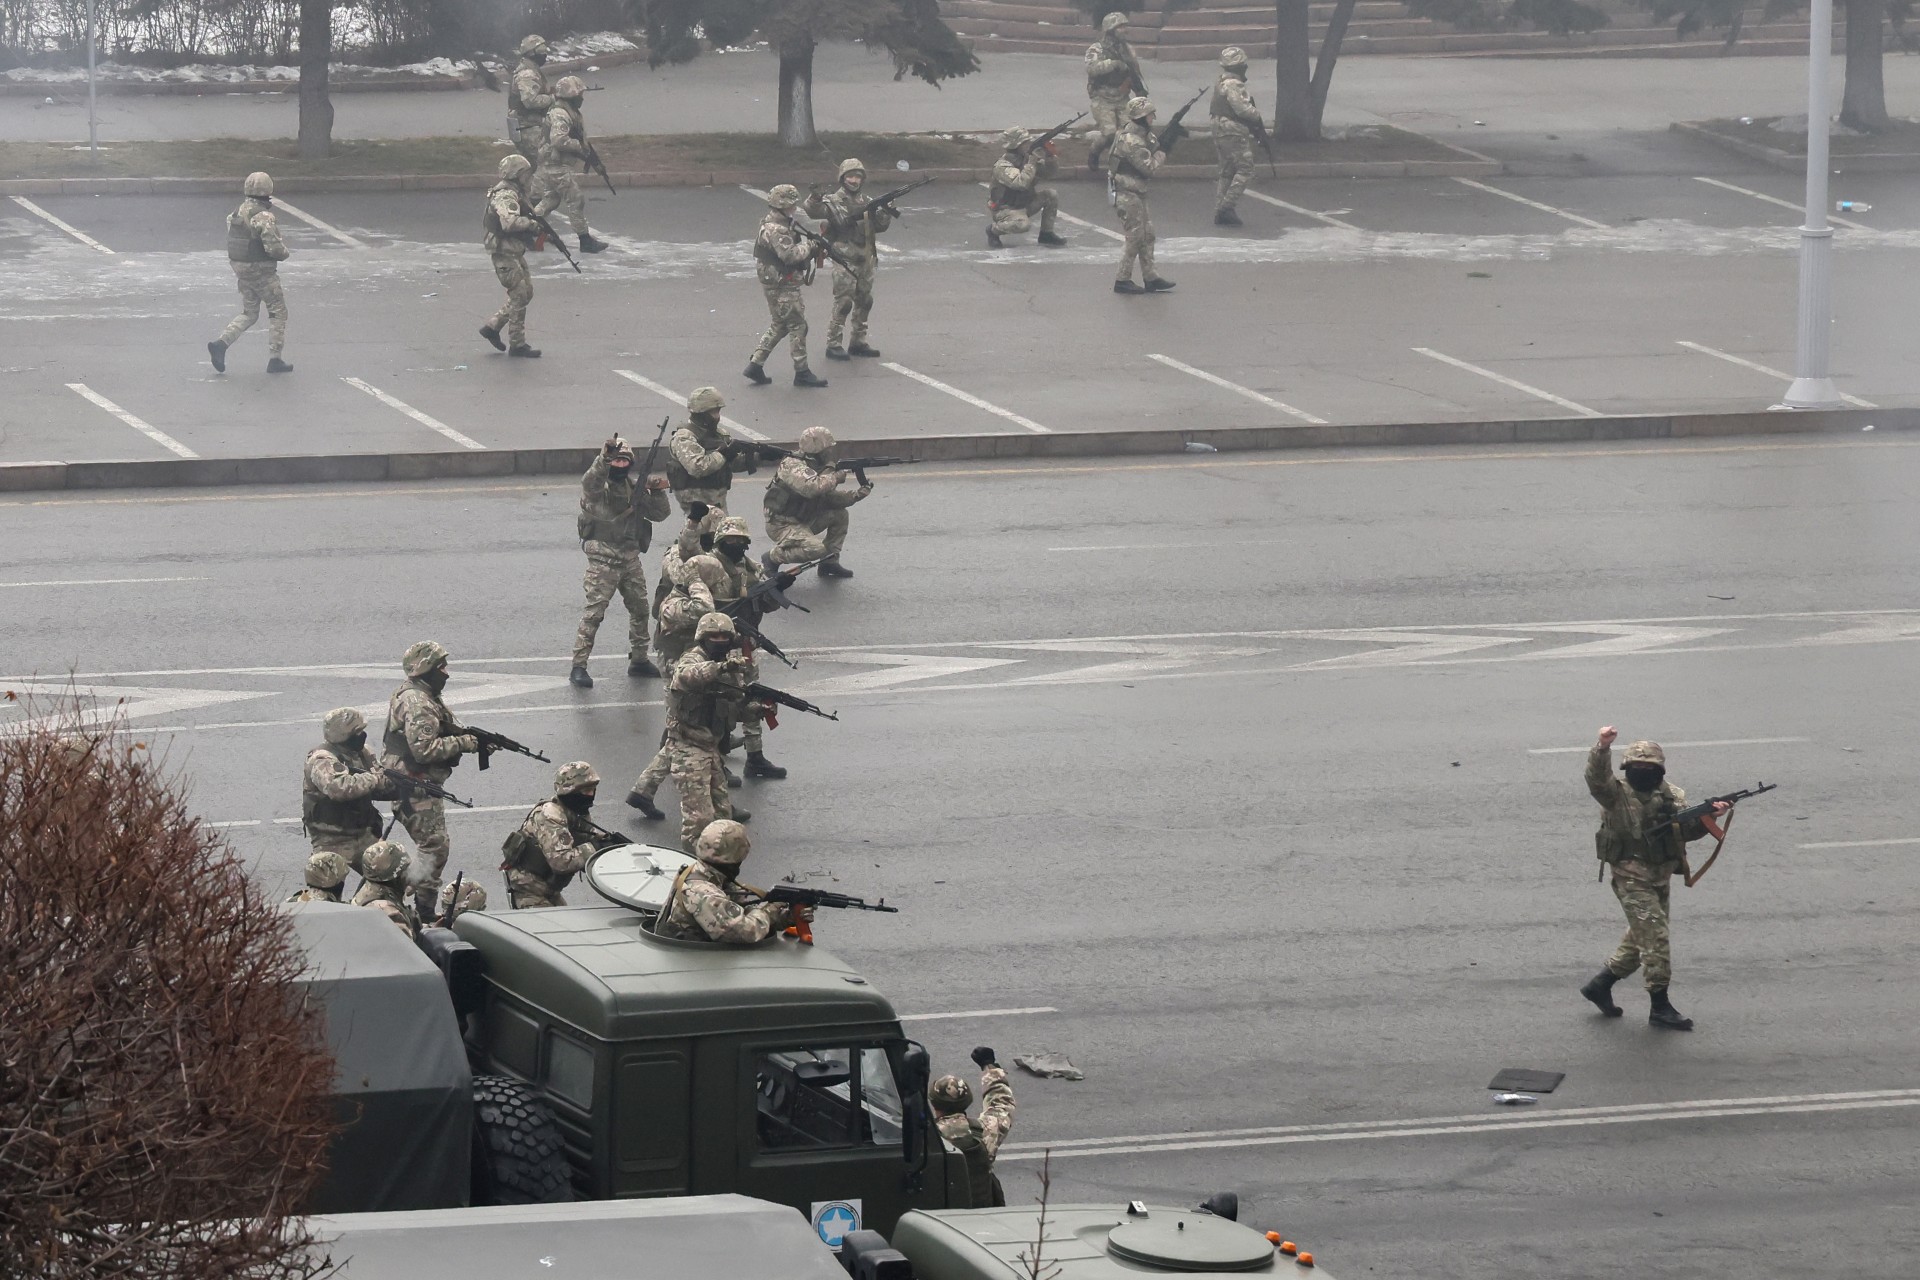 Security forces in Kazakhstan have responded to the protests. Photo: Valery SharifulinTASS via Getty Images